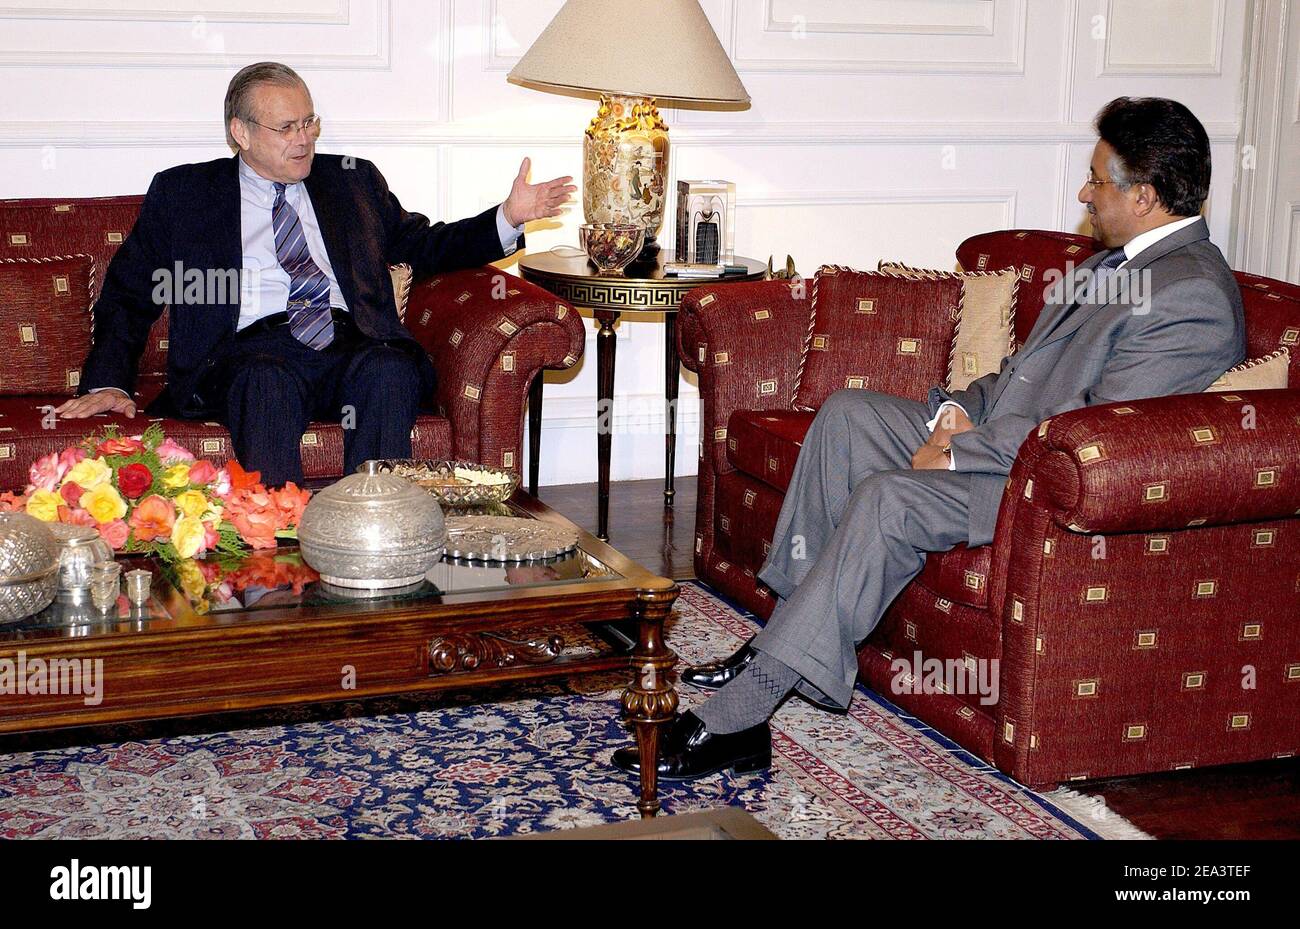 Secretary of Defense Donald H. Rumsfeld meets to discuss the global war on terrorism with Pakistan's President Gen. Pervez Musharraf at the presidential retreat in Islamabad, Pakistan, on April 13, 2005. Rumsfeld is in Pakistan to meet with key government officials. DoD photo by Tech. Sgt. Cherie A. Thurlby, U.S. Air Force. Photo by DOD/ABACA. Stock Photo